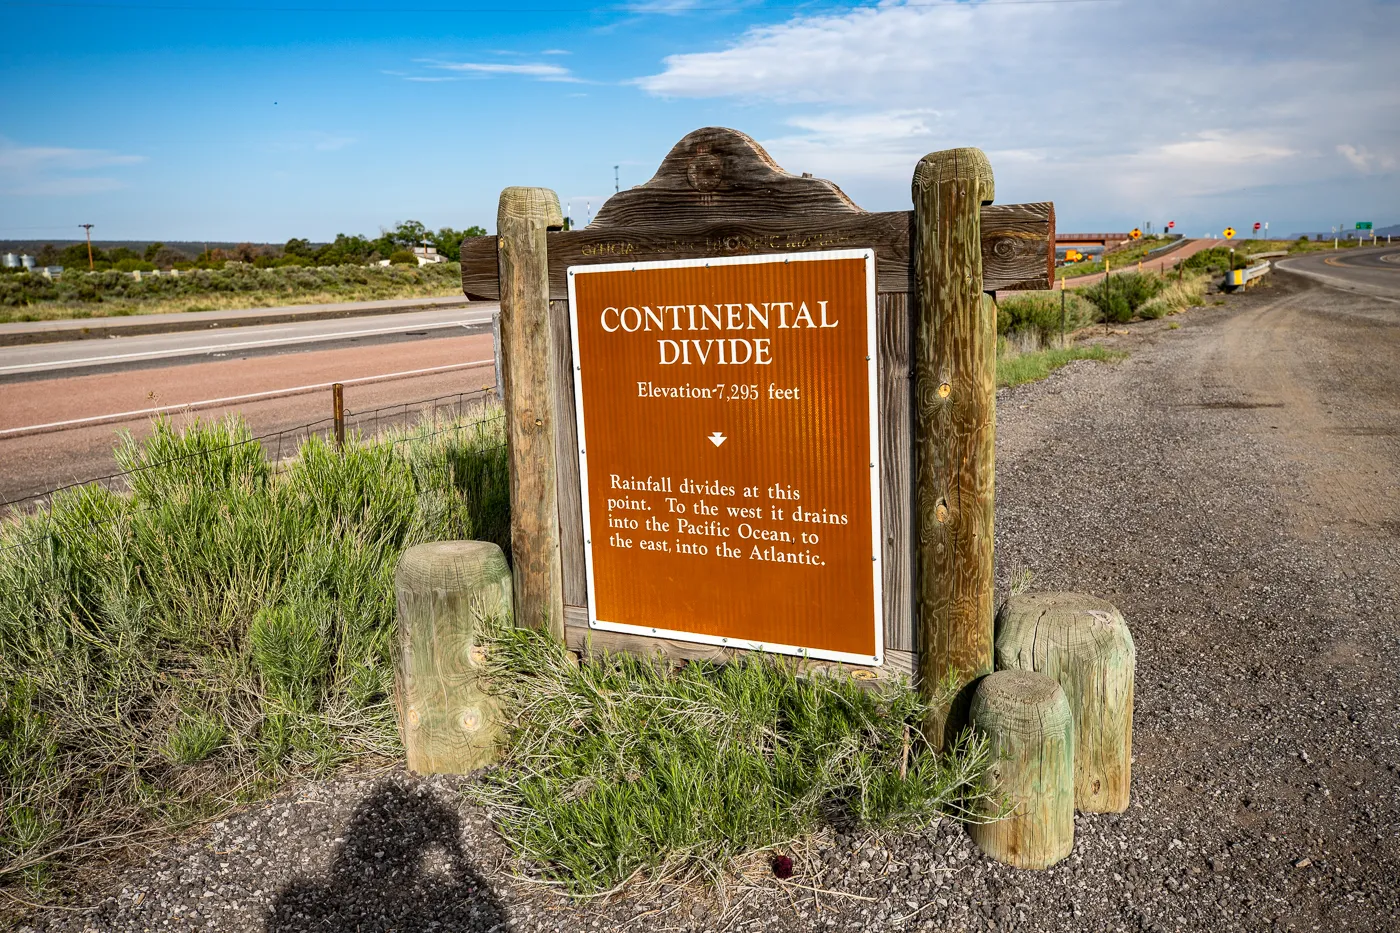 Continental Divide Marker in New Mexico (Route 66)